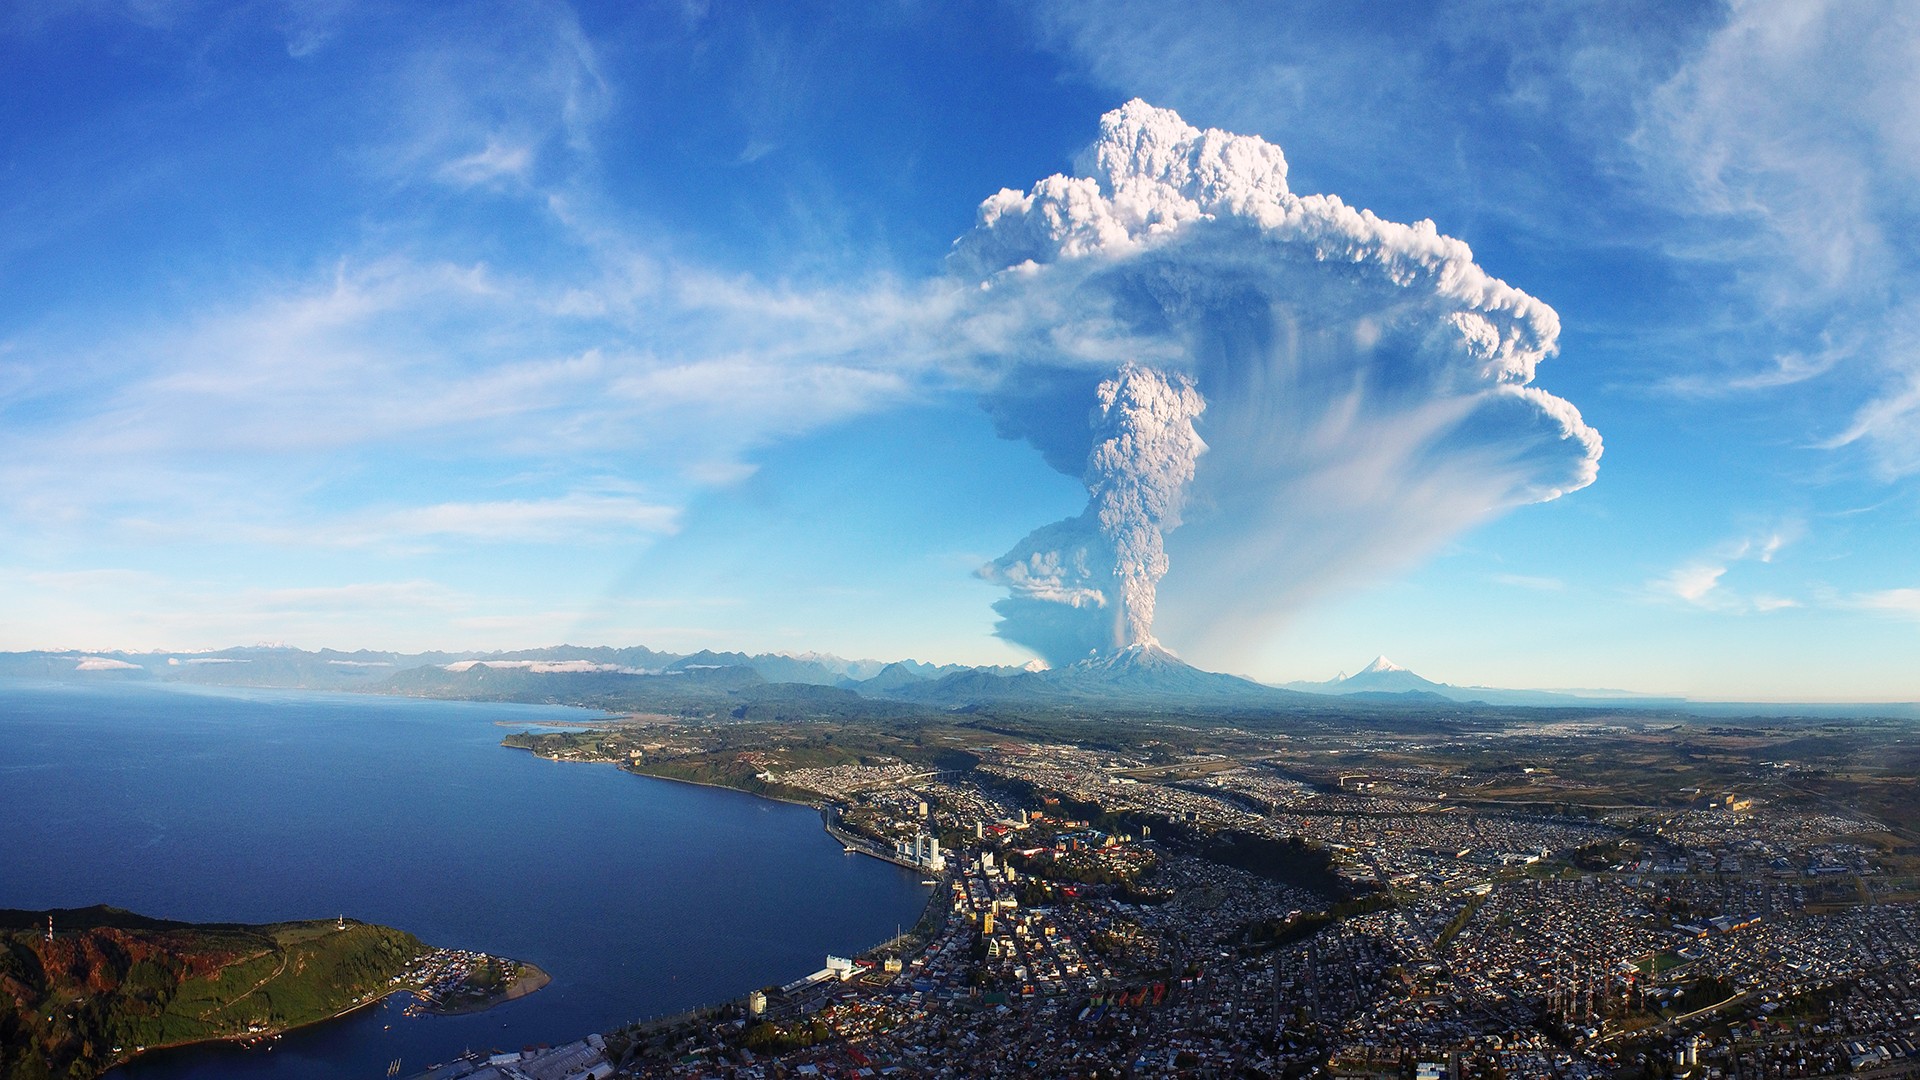 General 1920x1080 volcano cityscape city building nature eruption smoke snowy peak water sea house clouds aerial view eruptions landscape